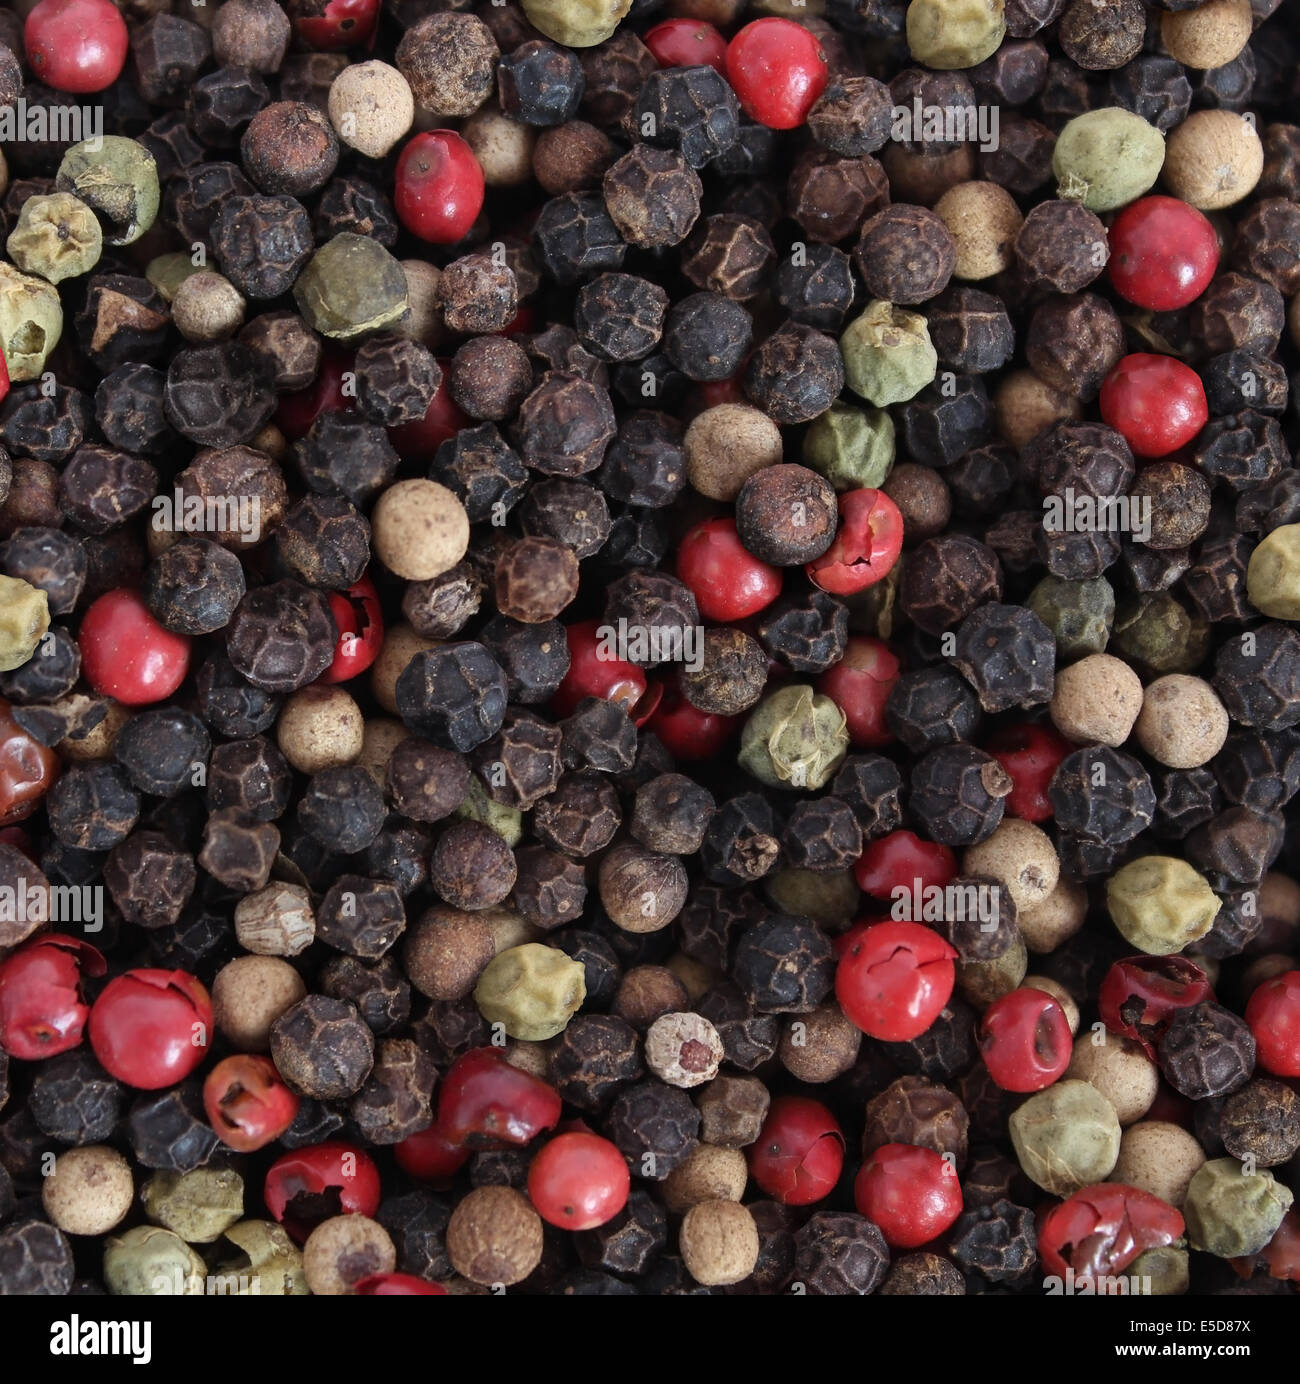 Pepper and peppercorn spice background as a food symbol for seasoning with hot spicey ingredients in cuisine preparation and vegetarian cooking. Stock Photo